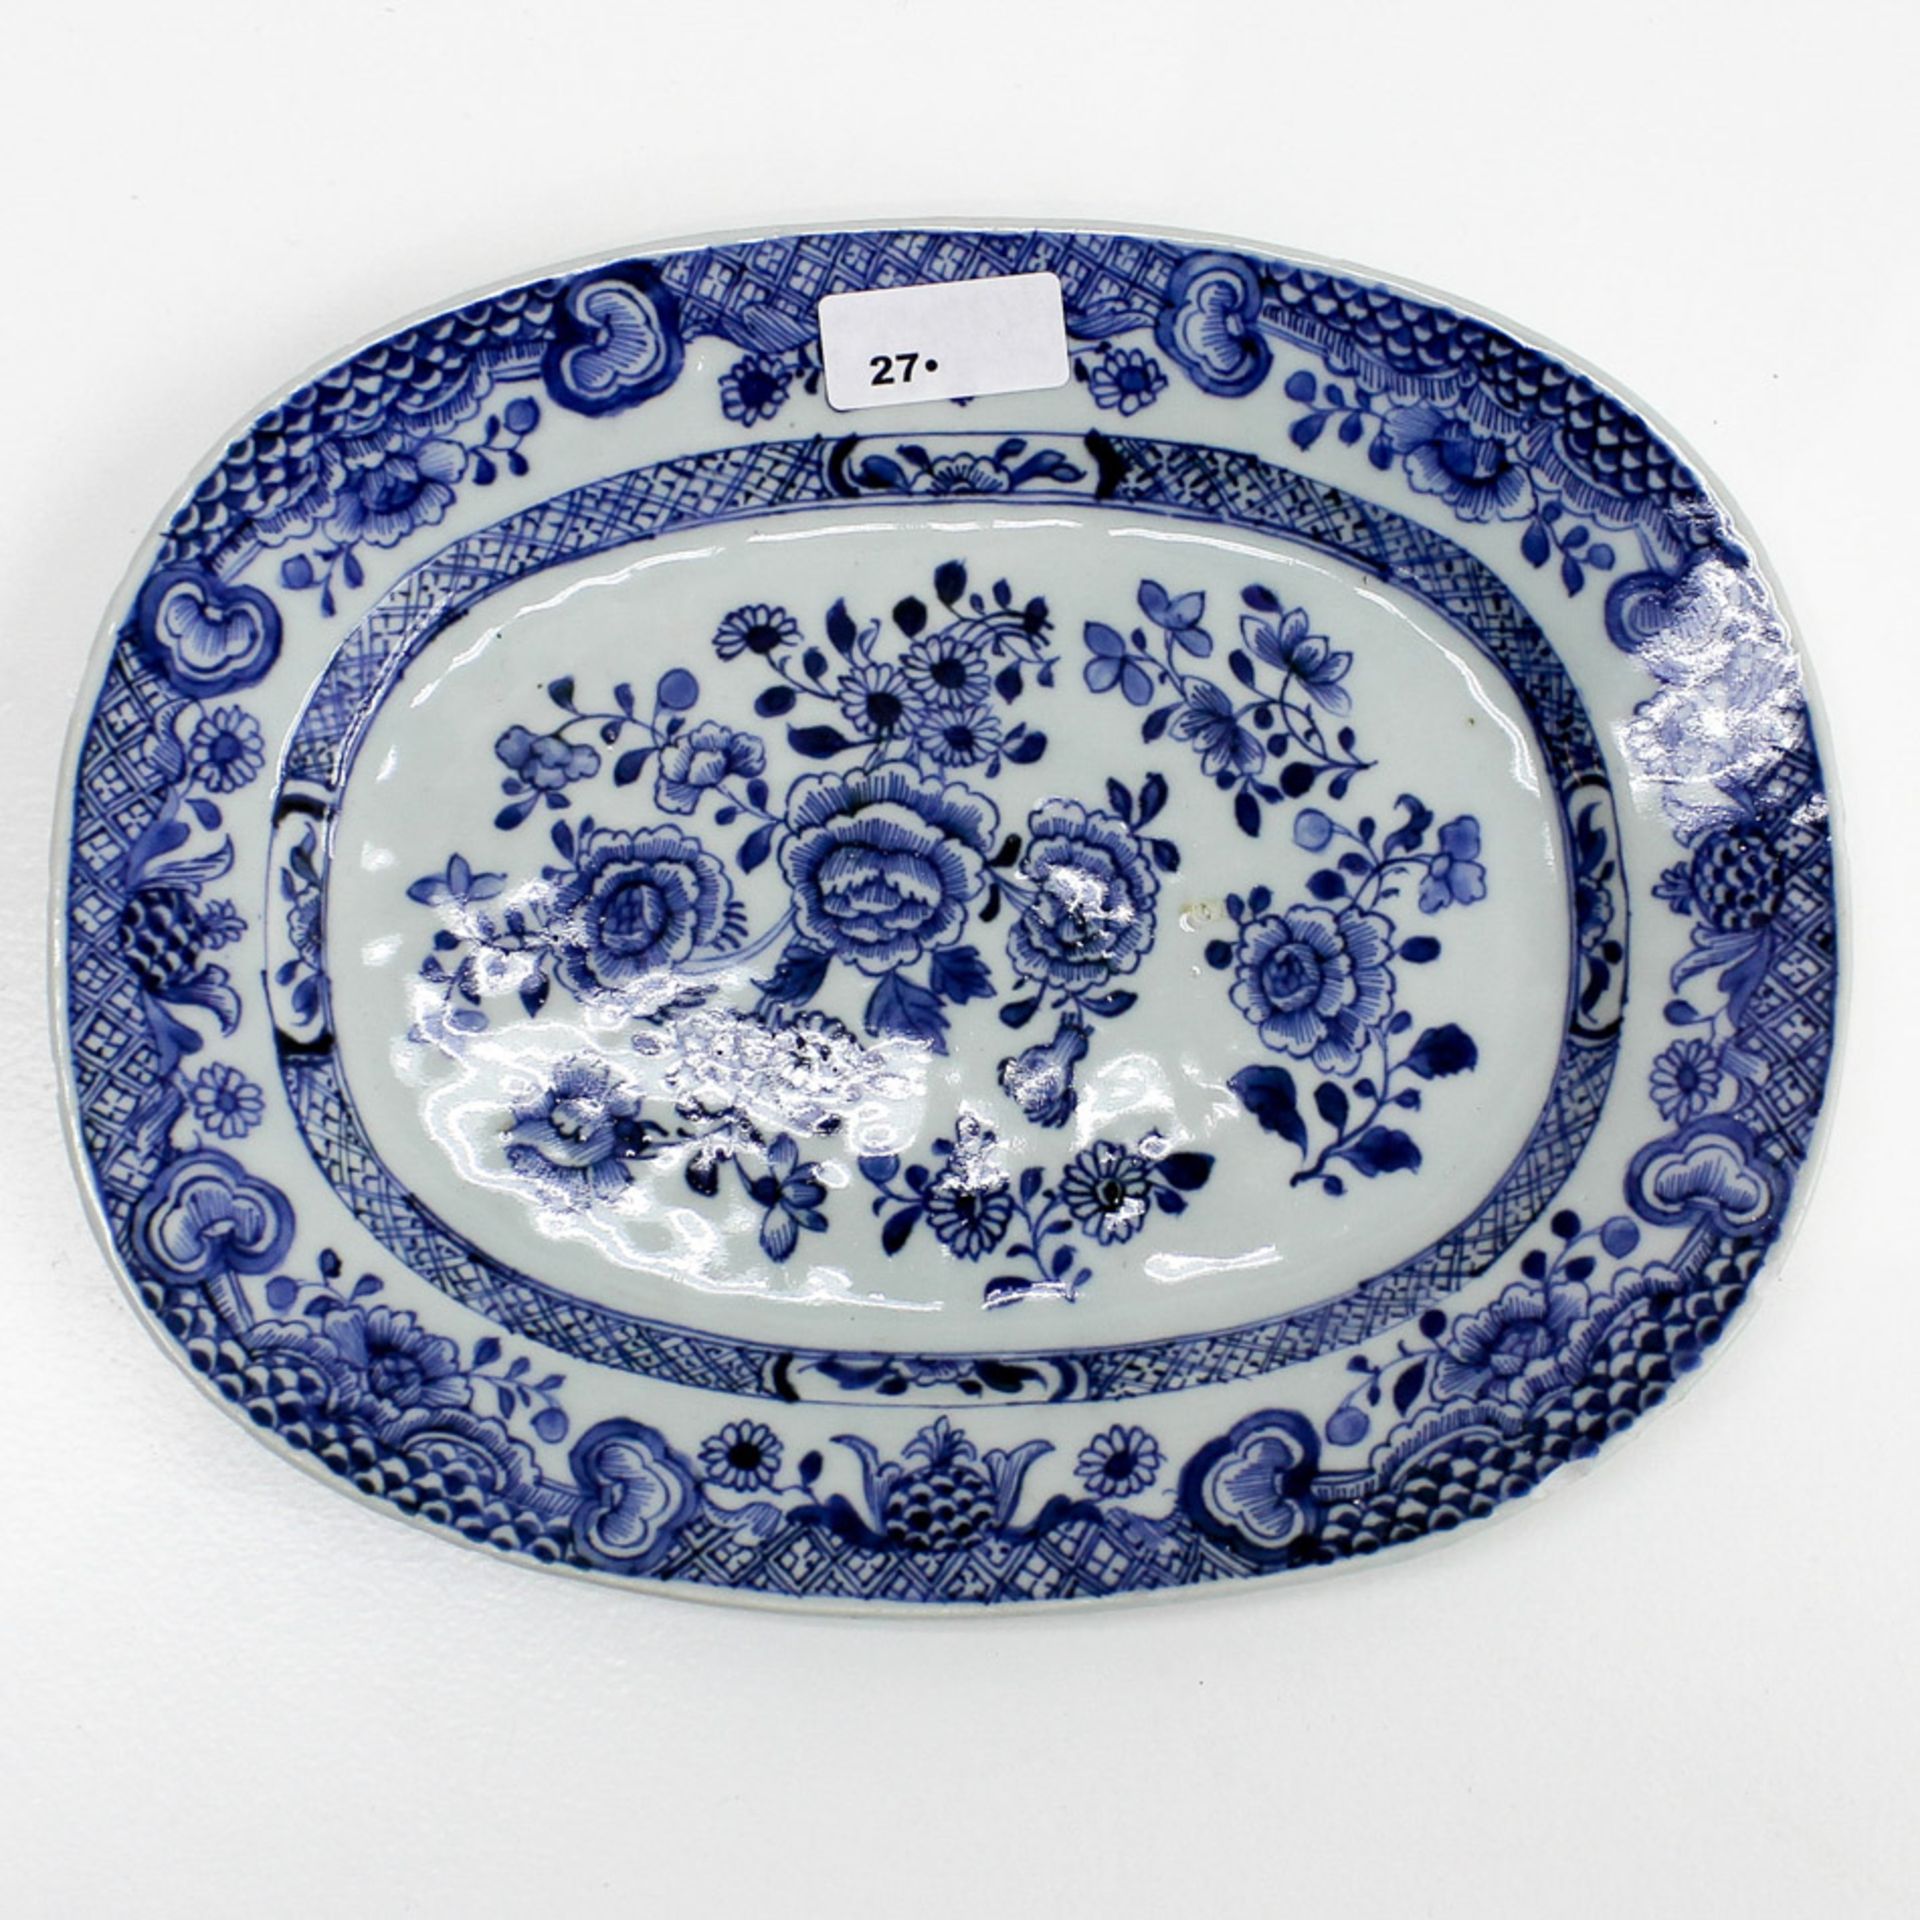 China Porcelain Small Platter Circa 1800 Blue and White Floral Décor. Flaking of glaze on edge.